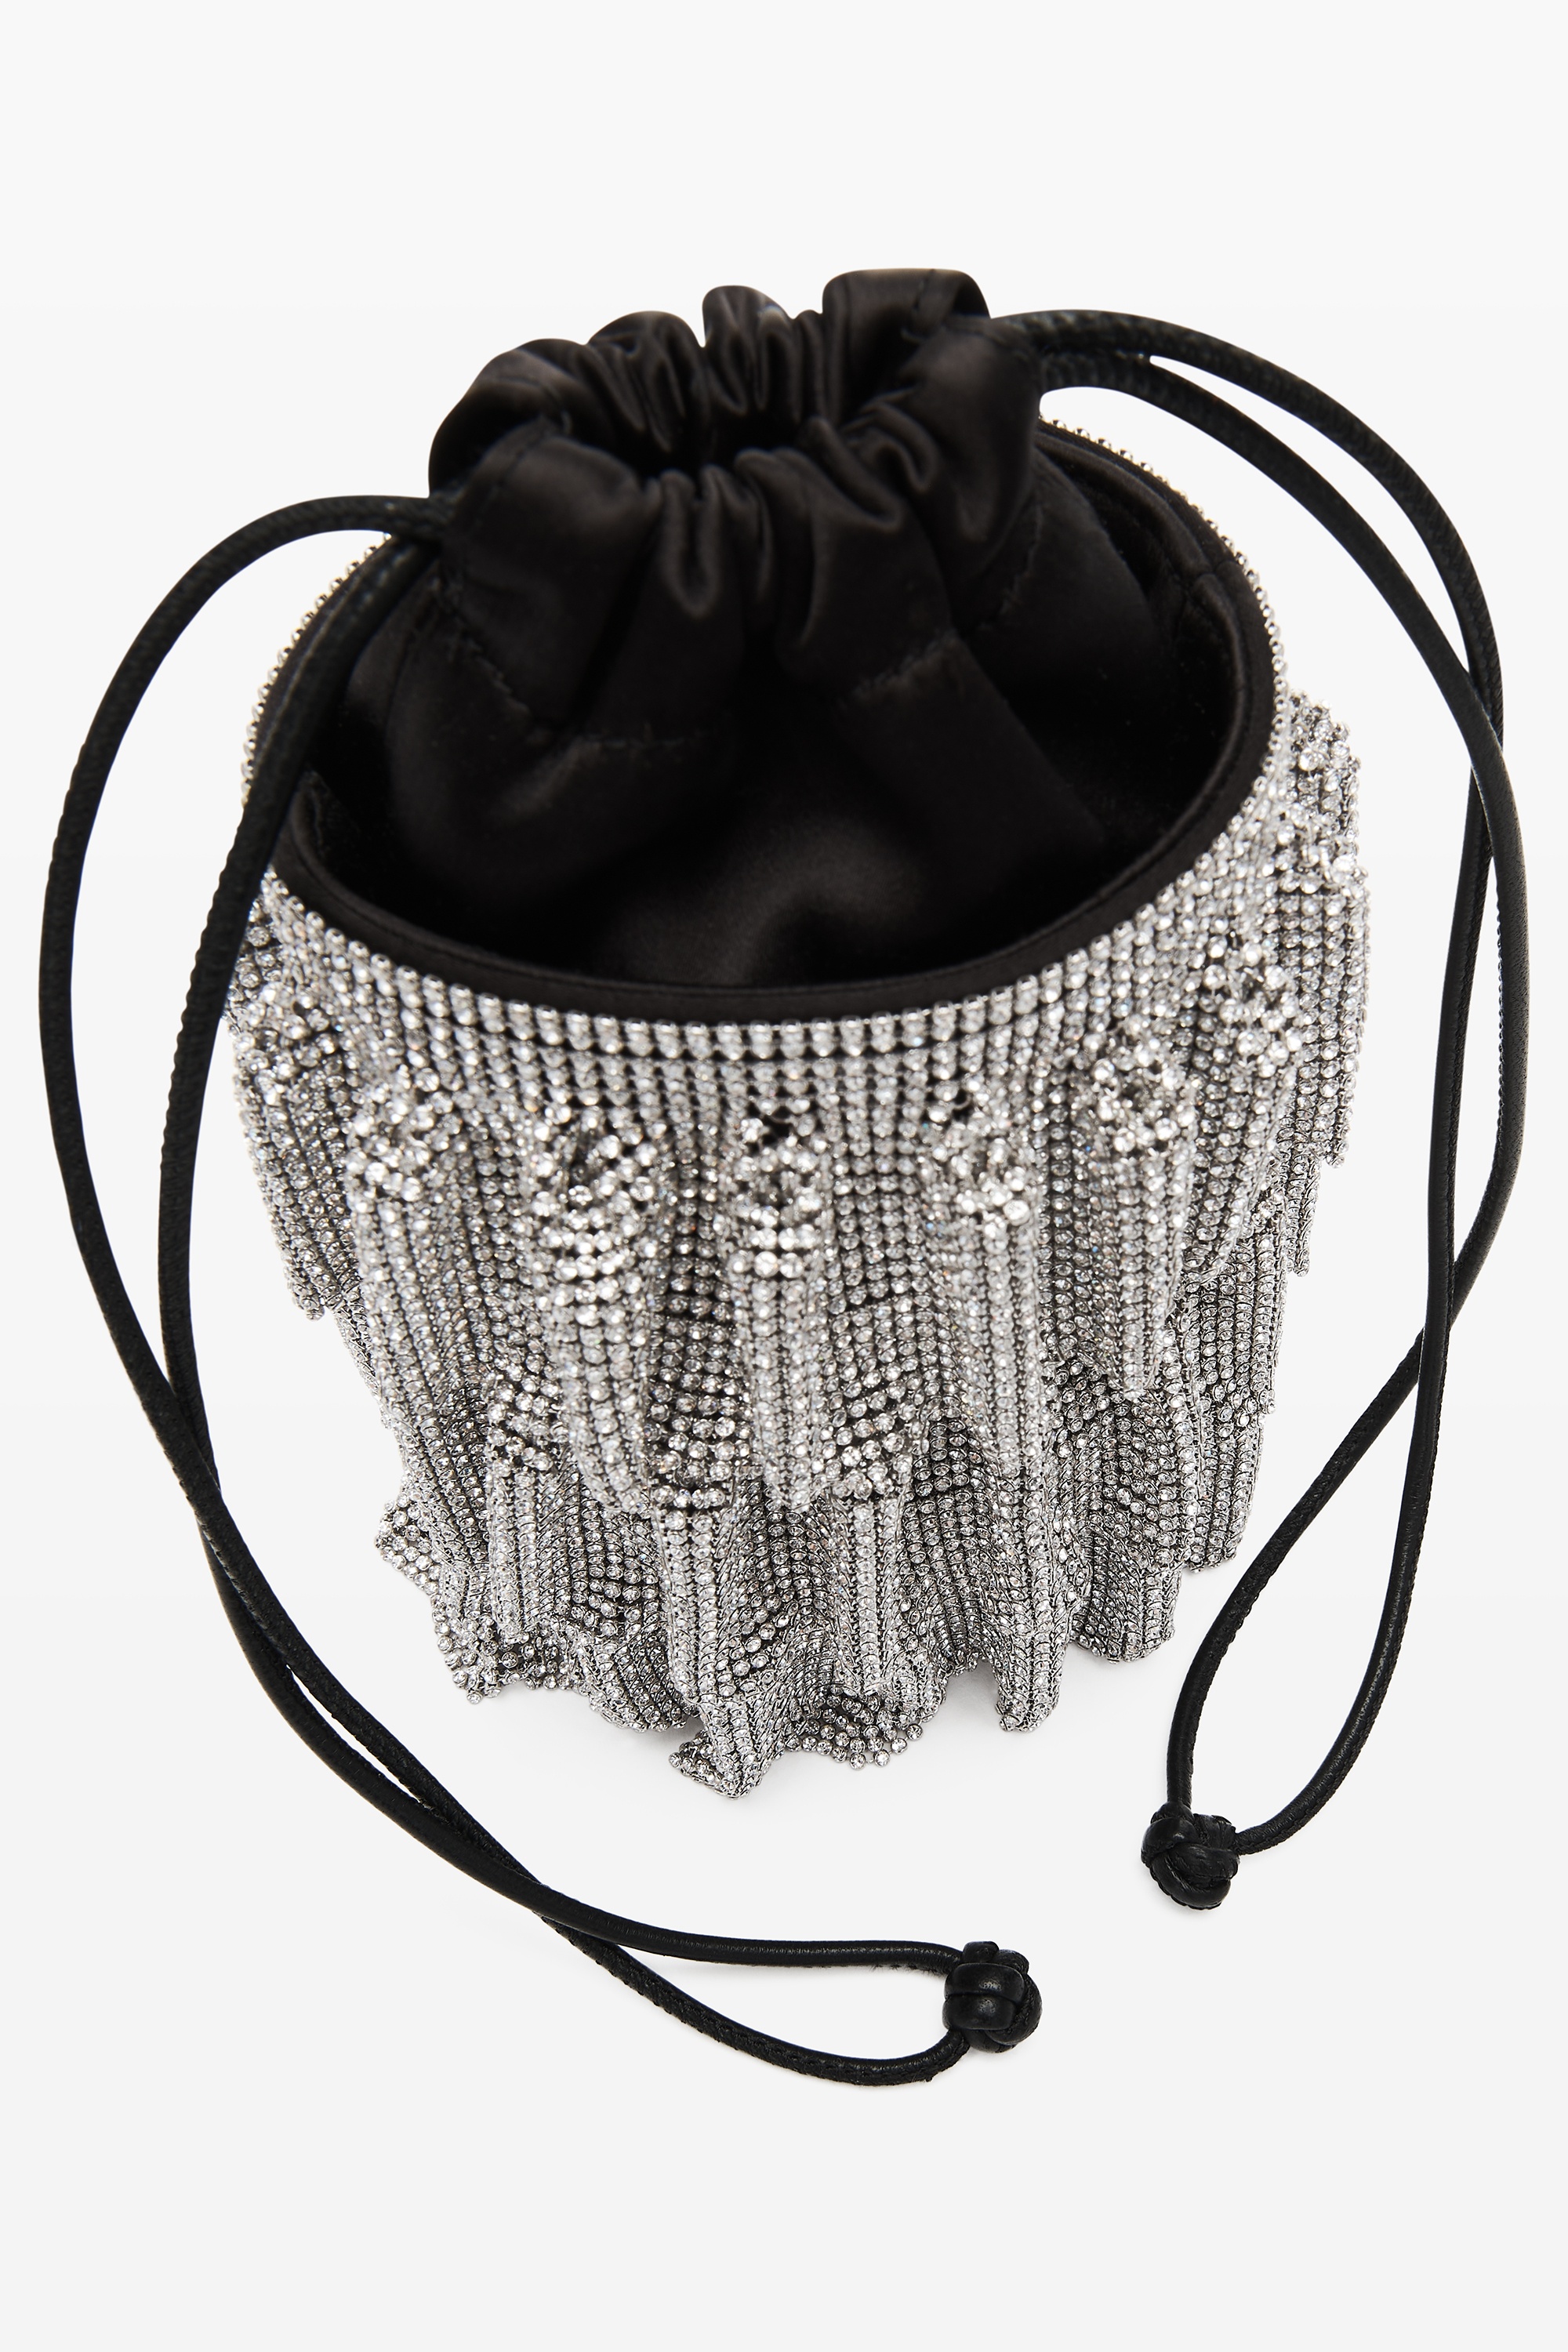 DRAWSTRING POUCH IN CRYSTAL MESH - 6